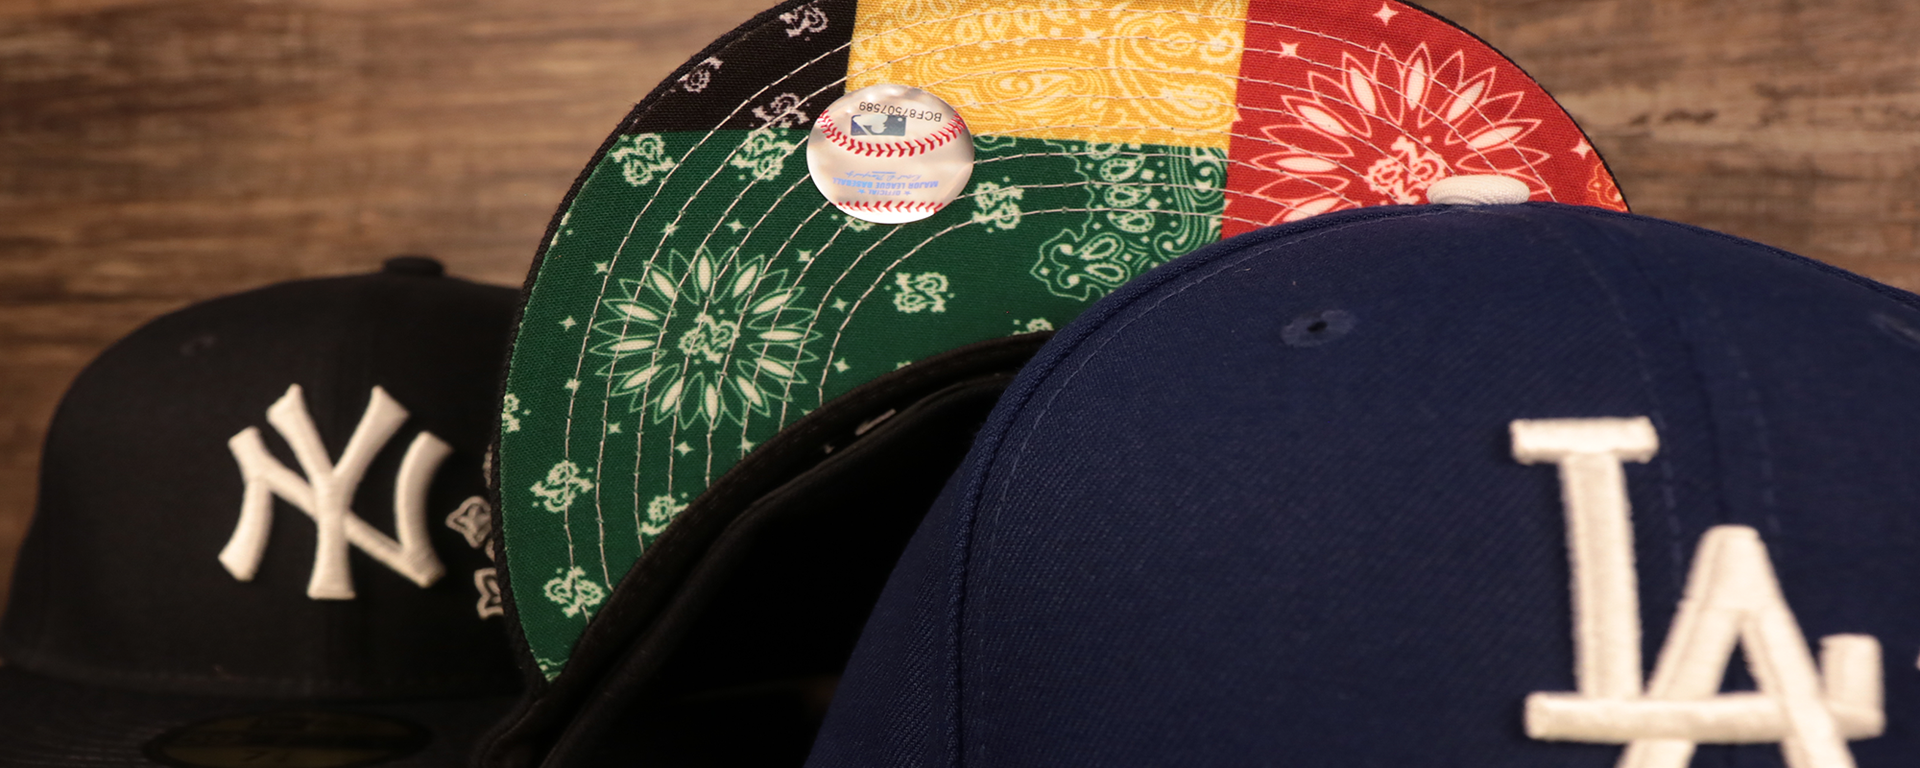 Multi-Color Bandana Under Visor 59Fifty Fitted Caps | Colorful Paisley Bandana Bottom MLB Fitteds